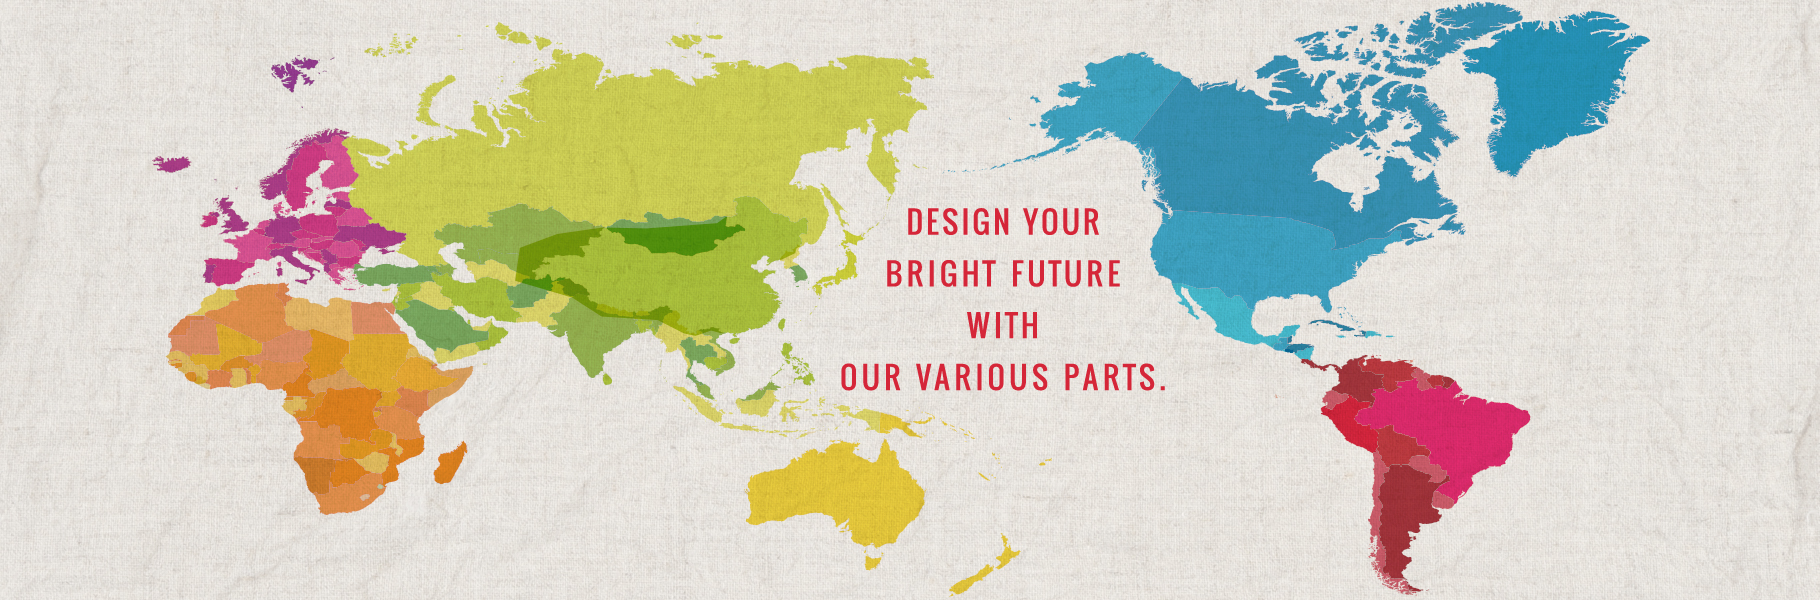 DESIGN YOUR BRIGHT FUTURE WITH OUR VARIOUS PARTS.